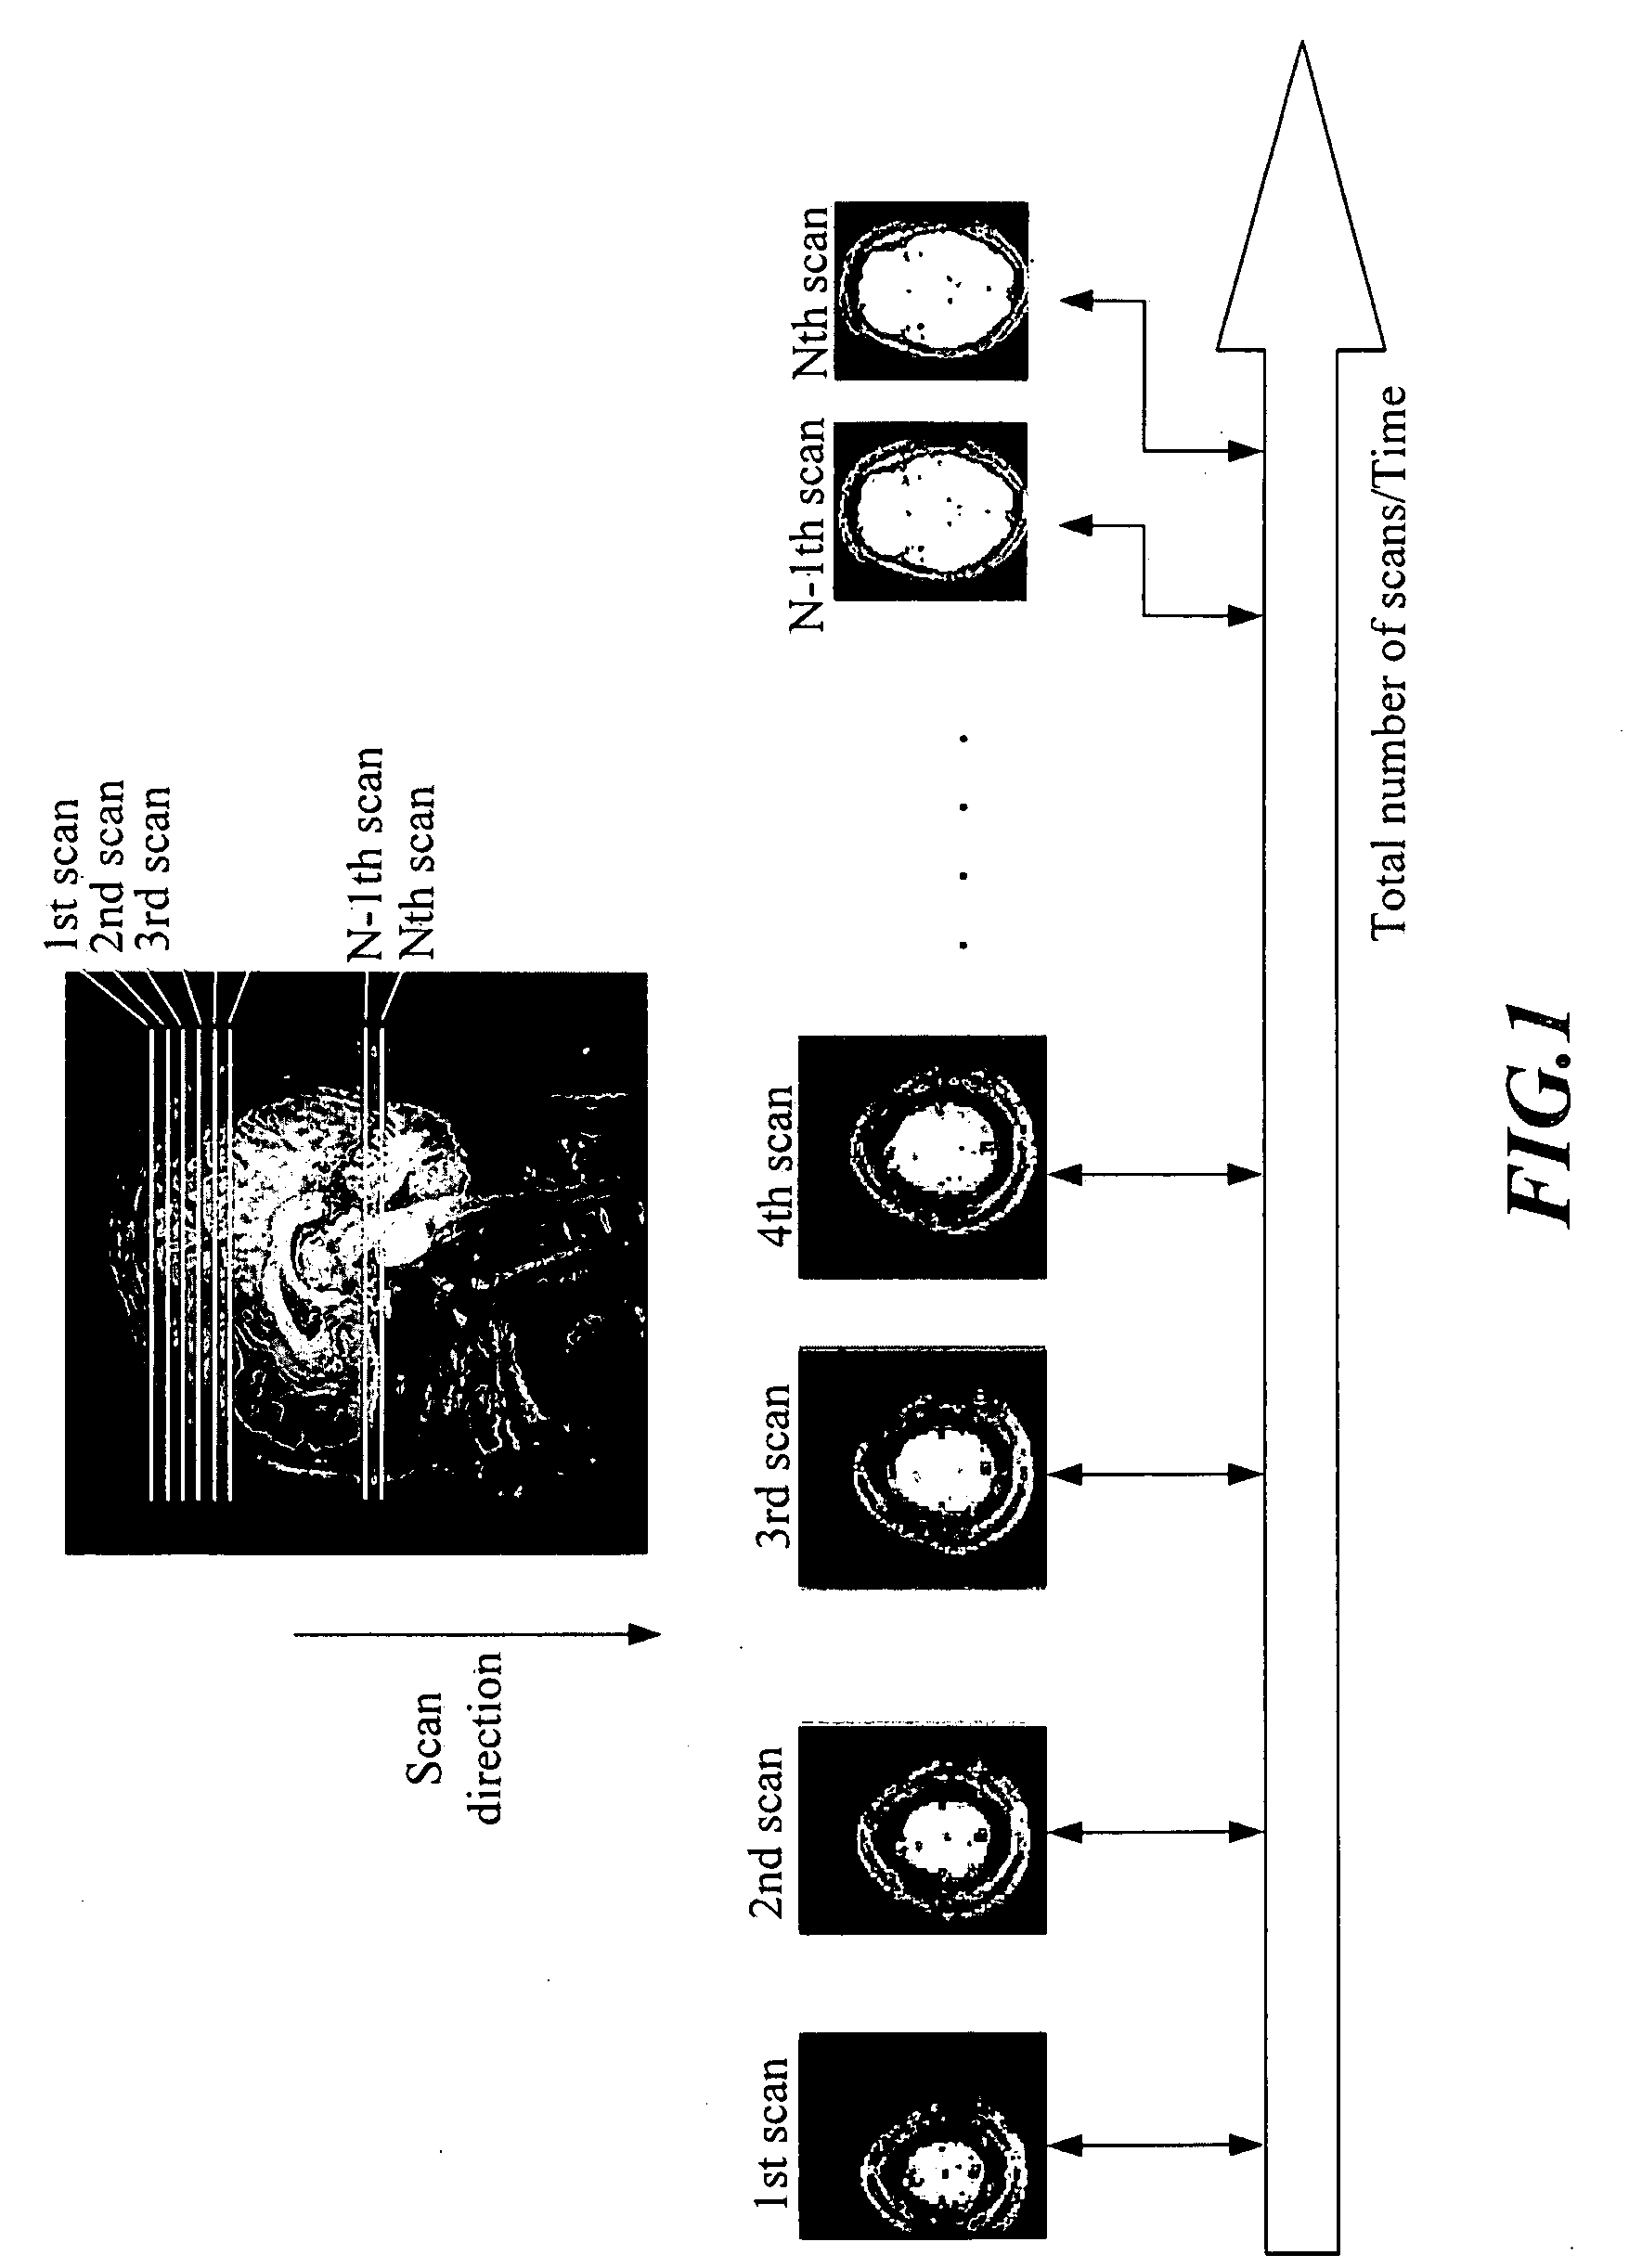 Method and apparatus for simultaneously acquiring multiple slices/slabs in magnetic resonance system